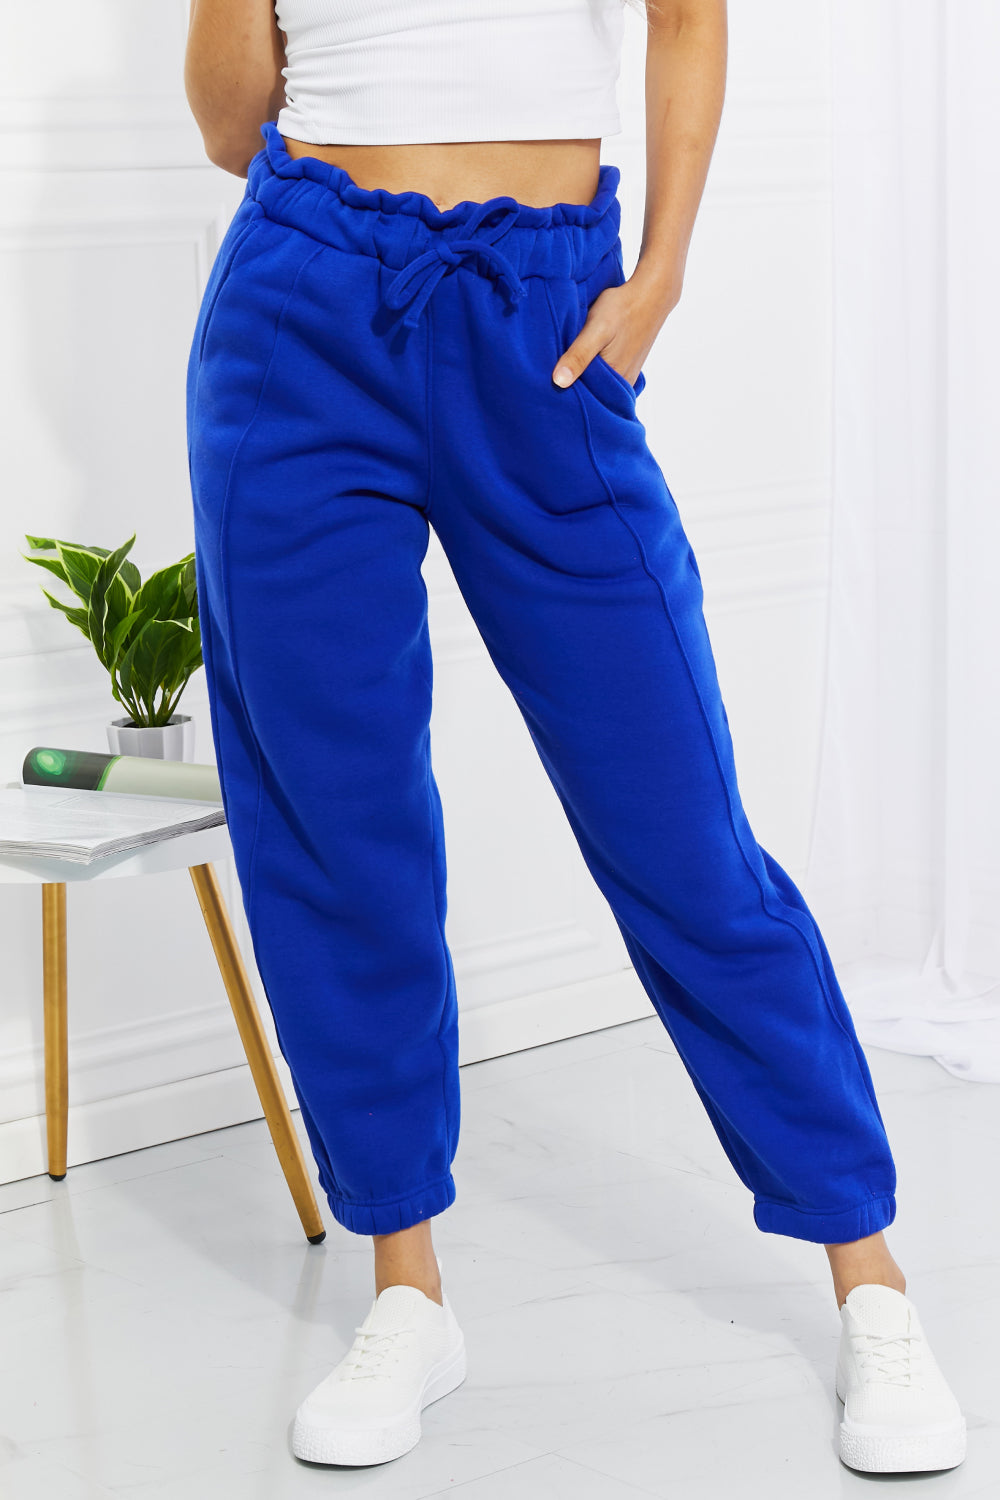 American-style Homemade Gouache Blue Loose Sports Pants Women's Spring And  Autumn High Waist Harlan Pants Slimming Sweatpants Ins Trendy